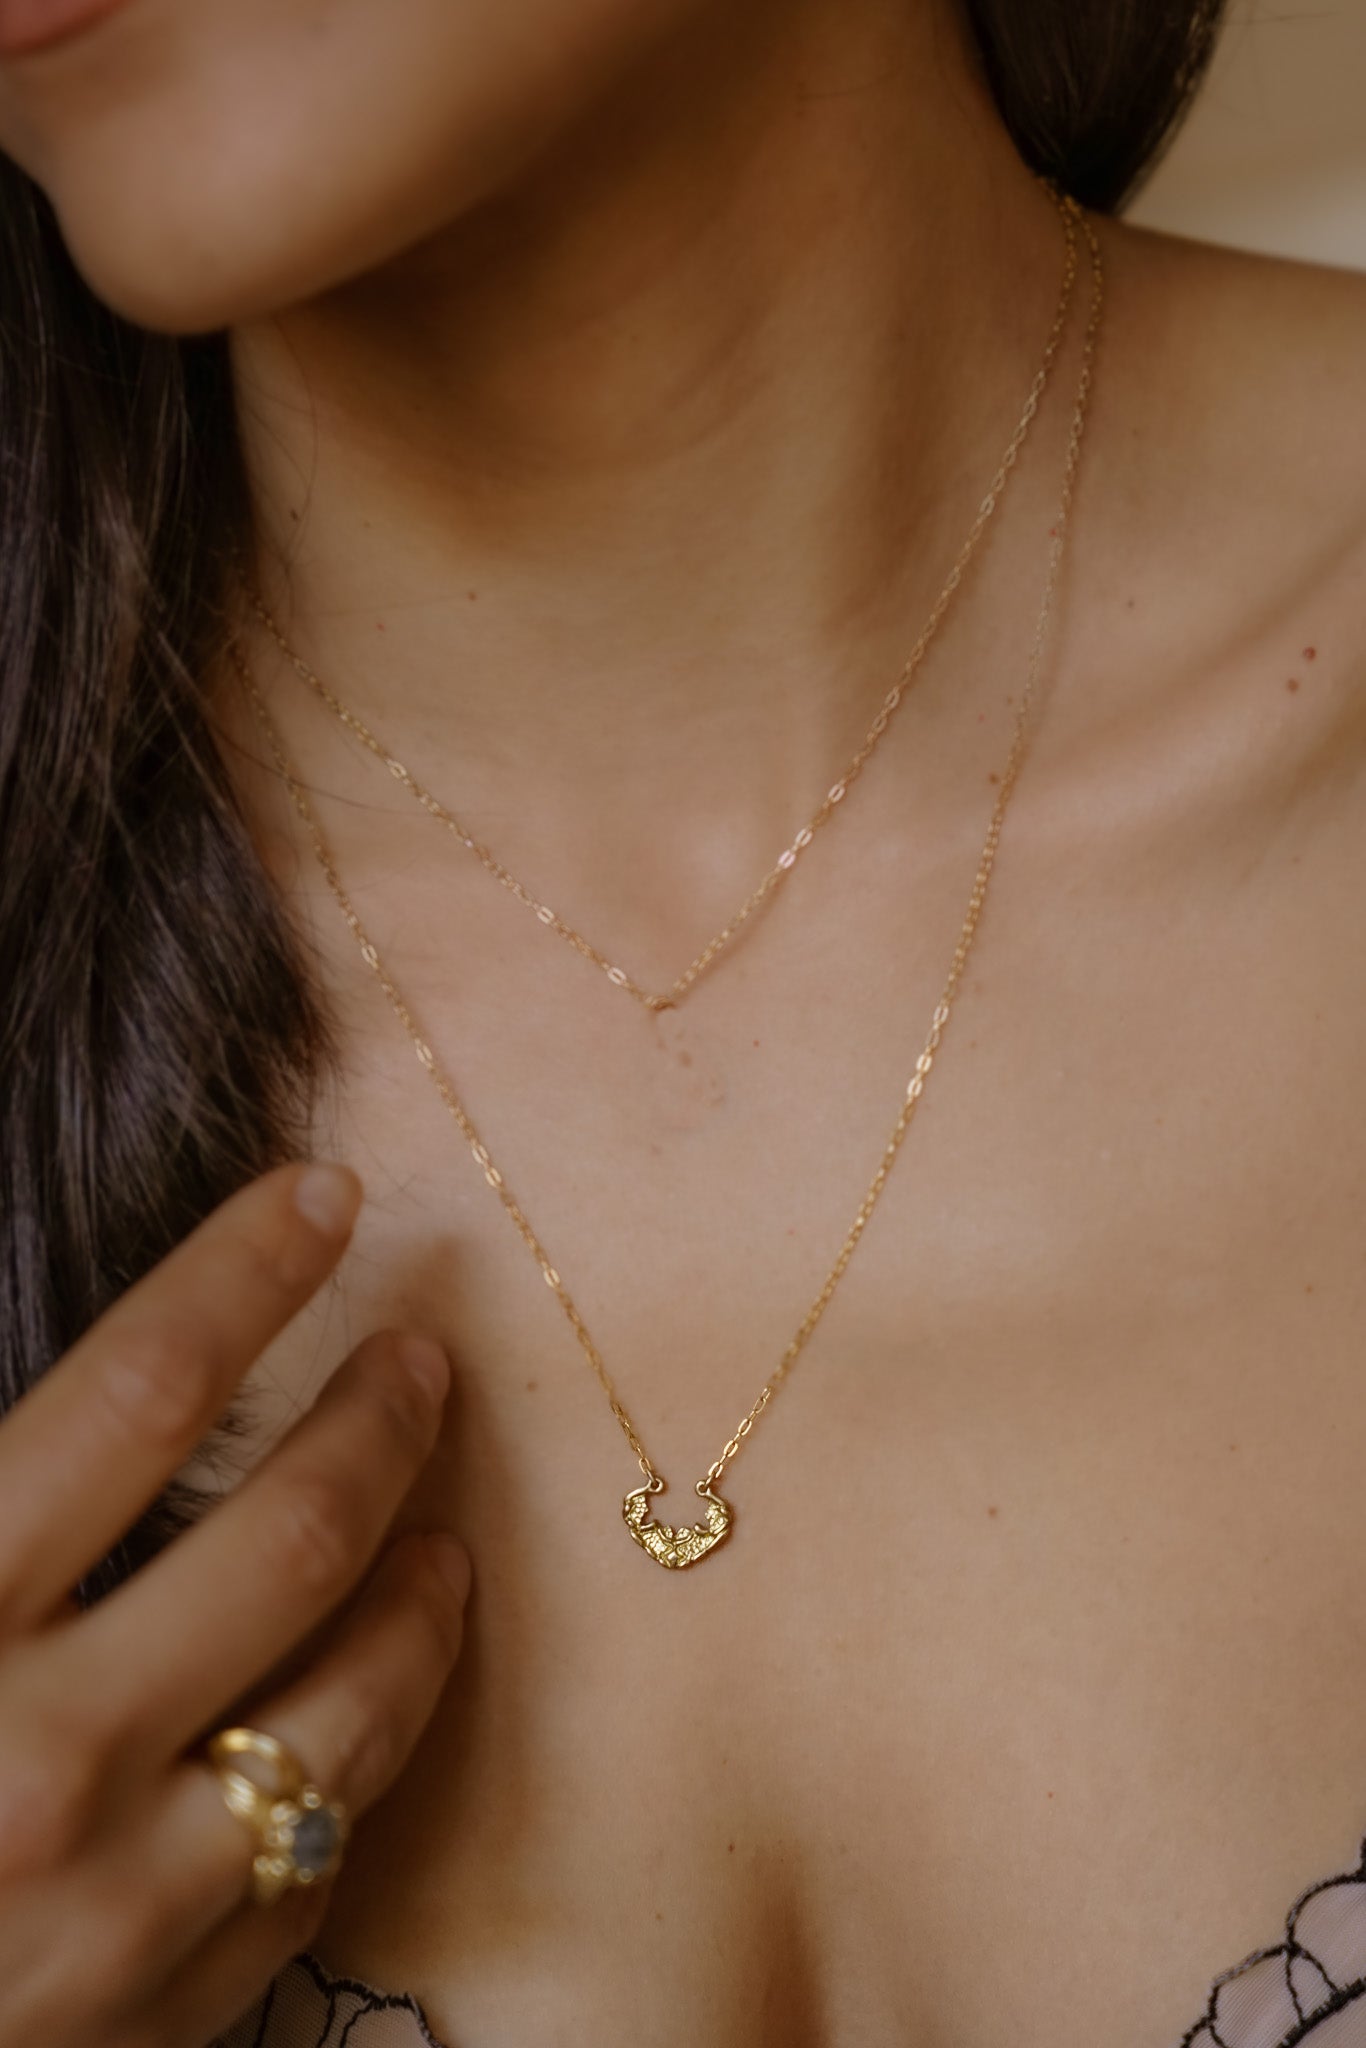 Named for the goddess of the sea, the Sedna necklace mirrors the undulating rhythm of the ocean. Gold waves expand and recede, revealing detailed texture that invites the eye to linger—a piece evocative of infinite strength and power. 